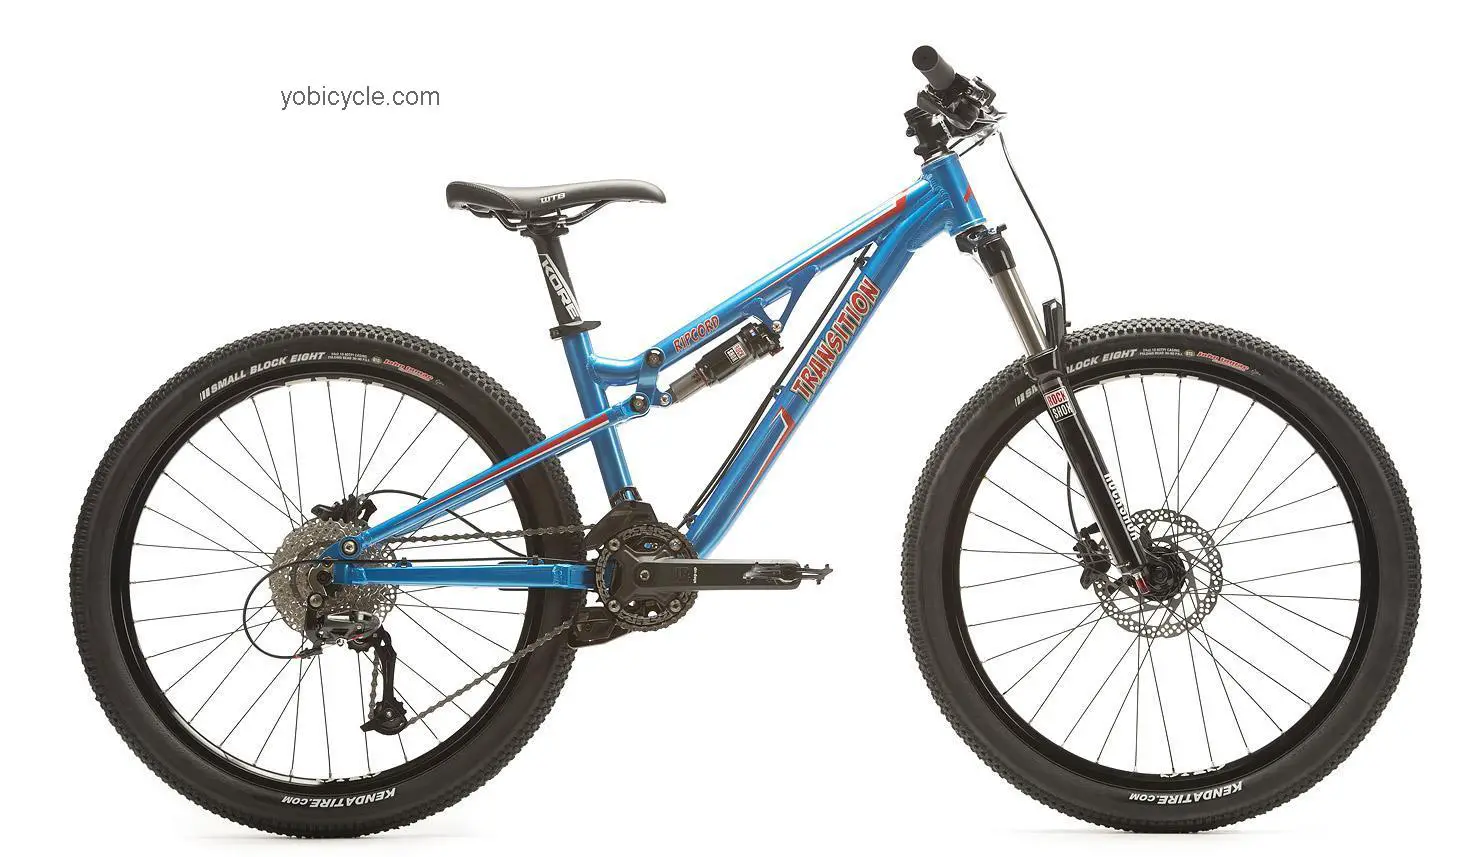 Transition  Ripcord Technical data and specifications